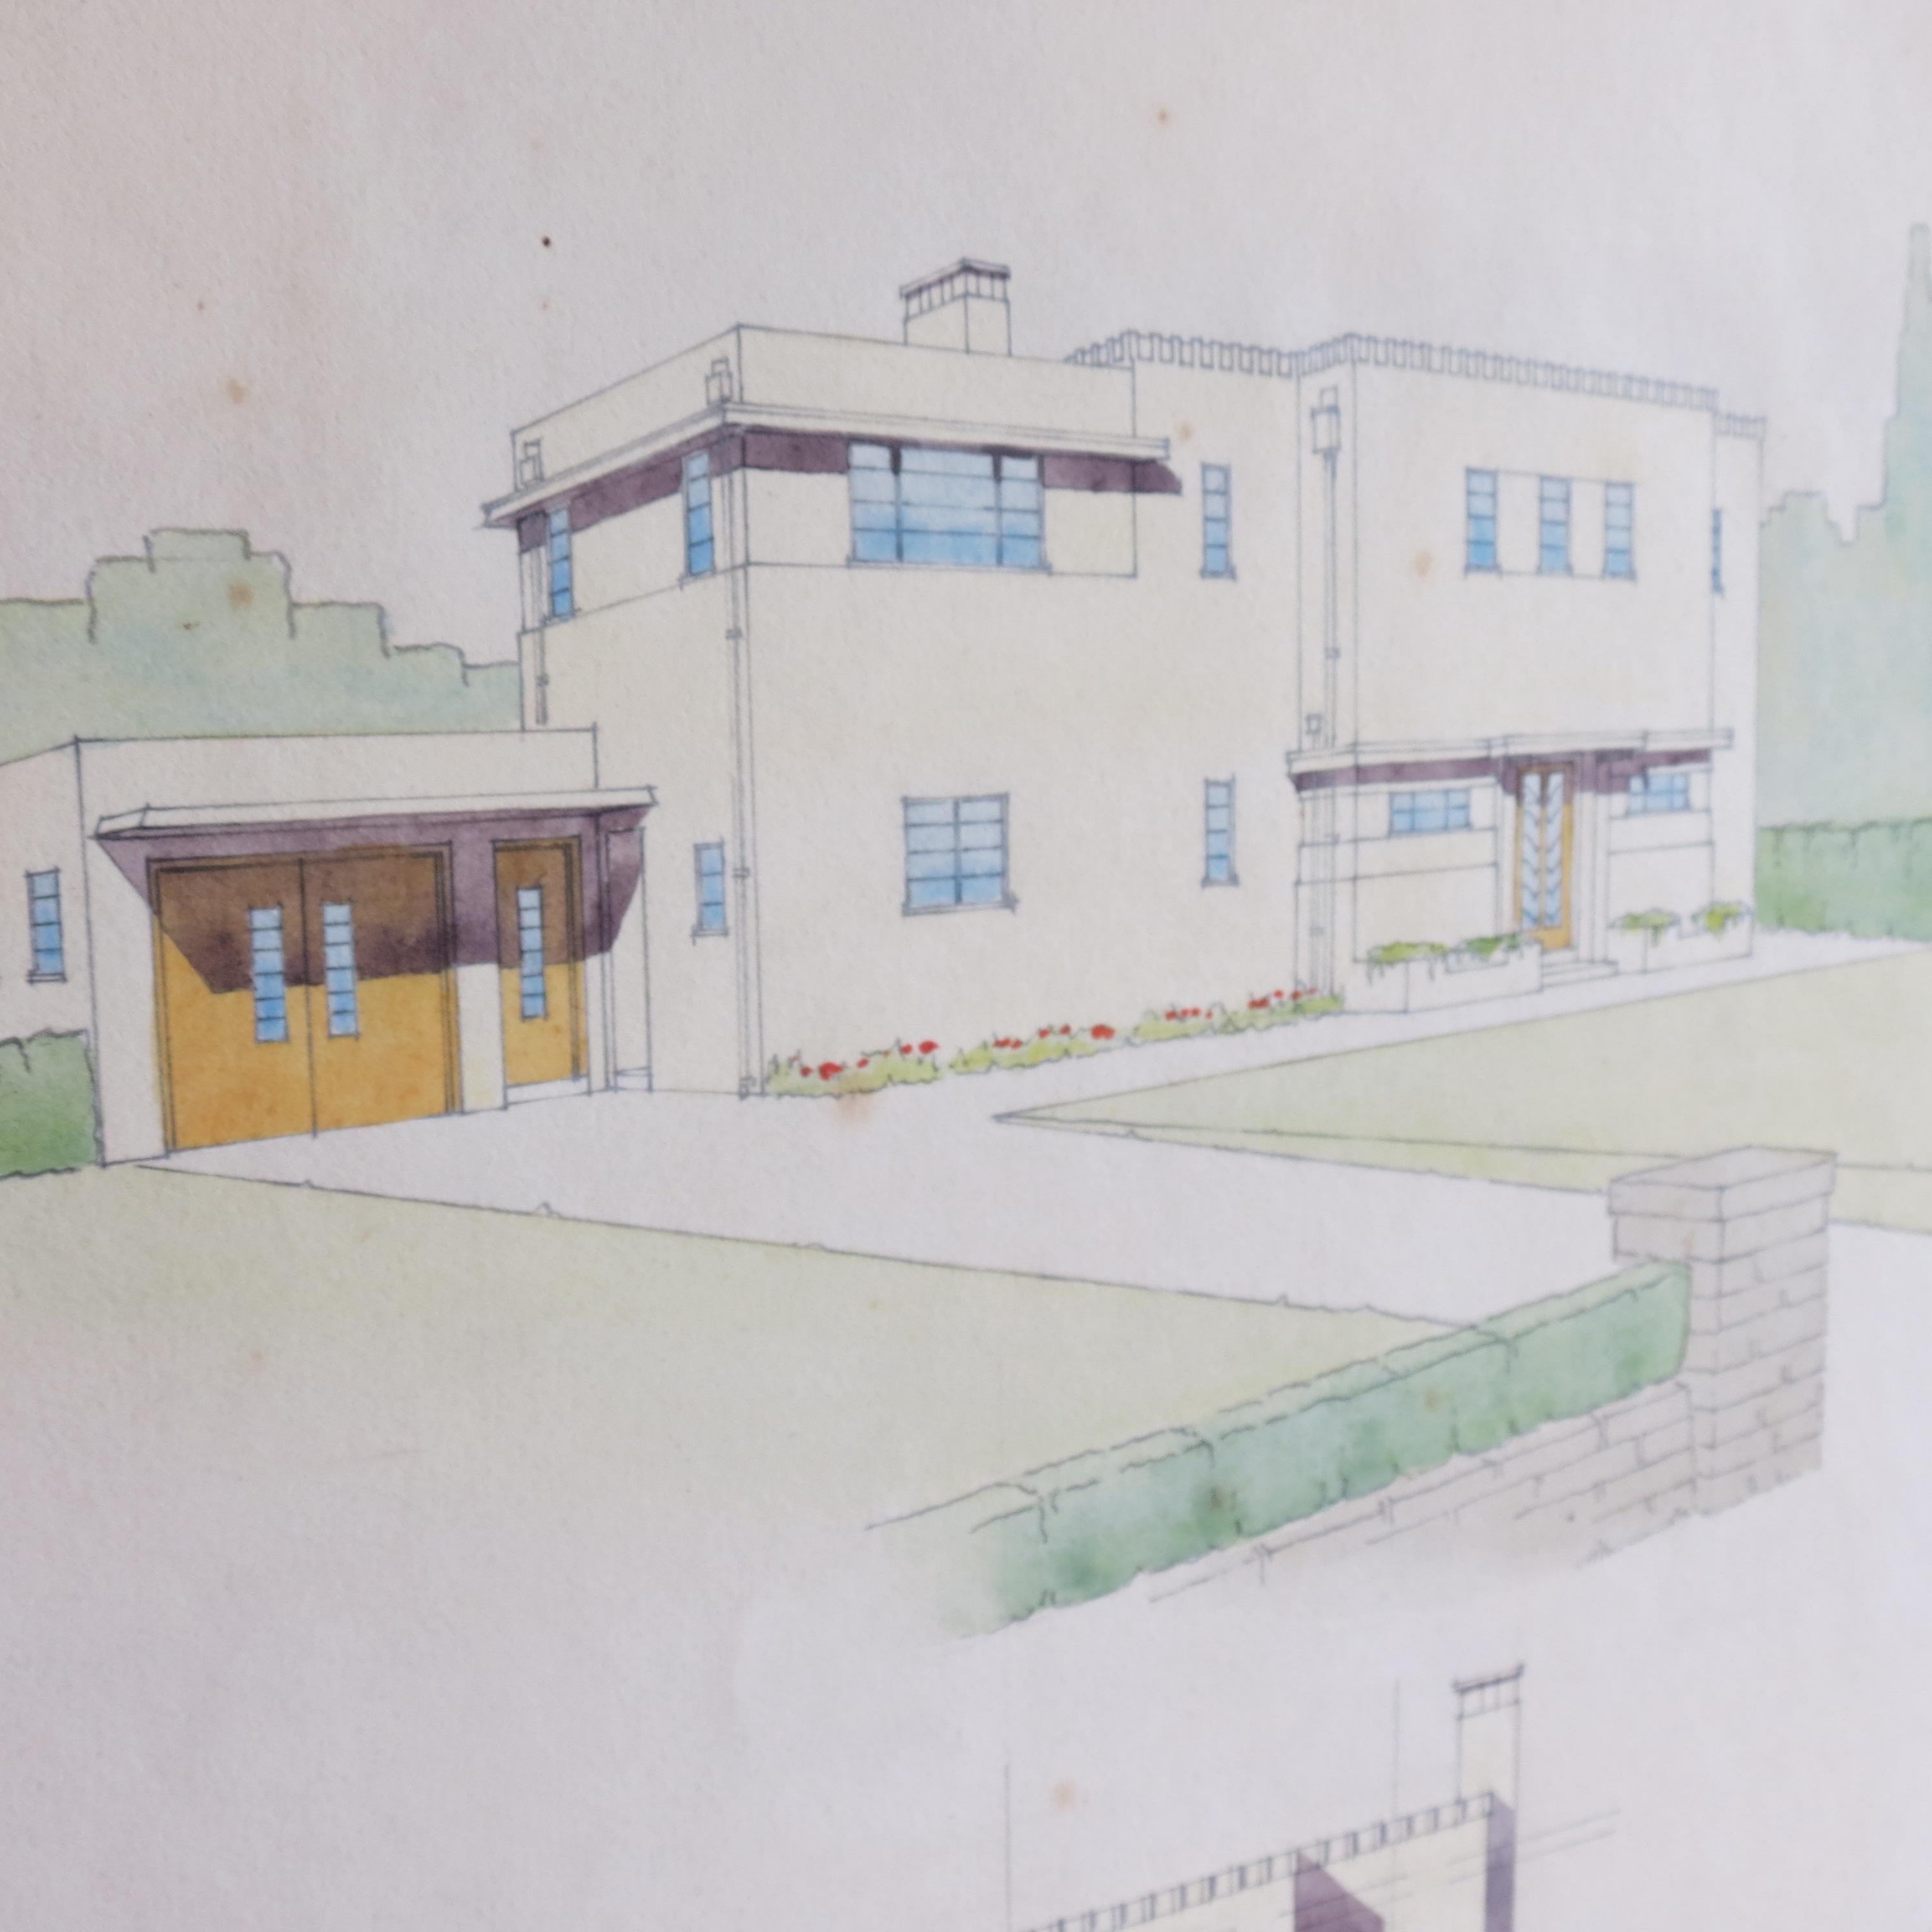 Original detailed drawing of plans for a Modernist House by P A Shreeve dated Jan 1934. Showing different elevations of a modernist house.

An original hand produced drawing. In vintage condition, some spotting to paper.

ST1153.